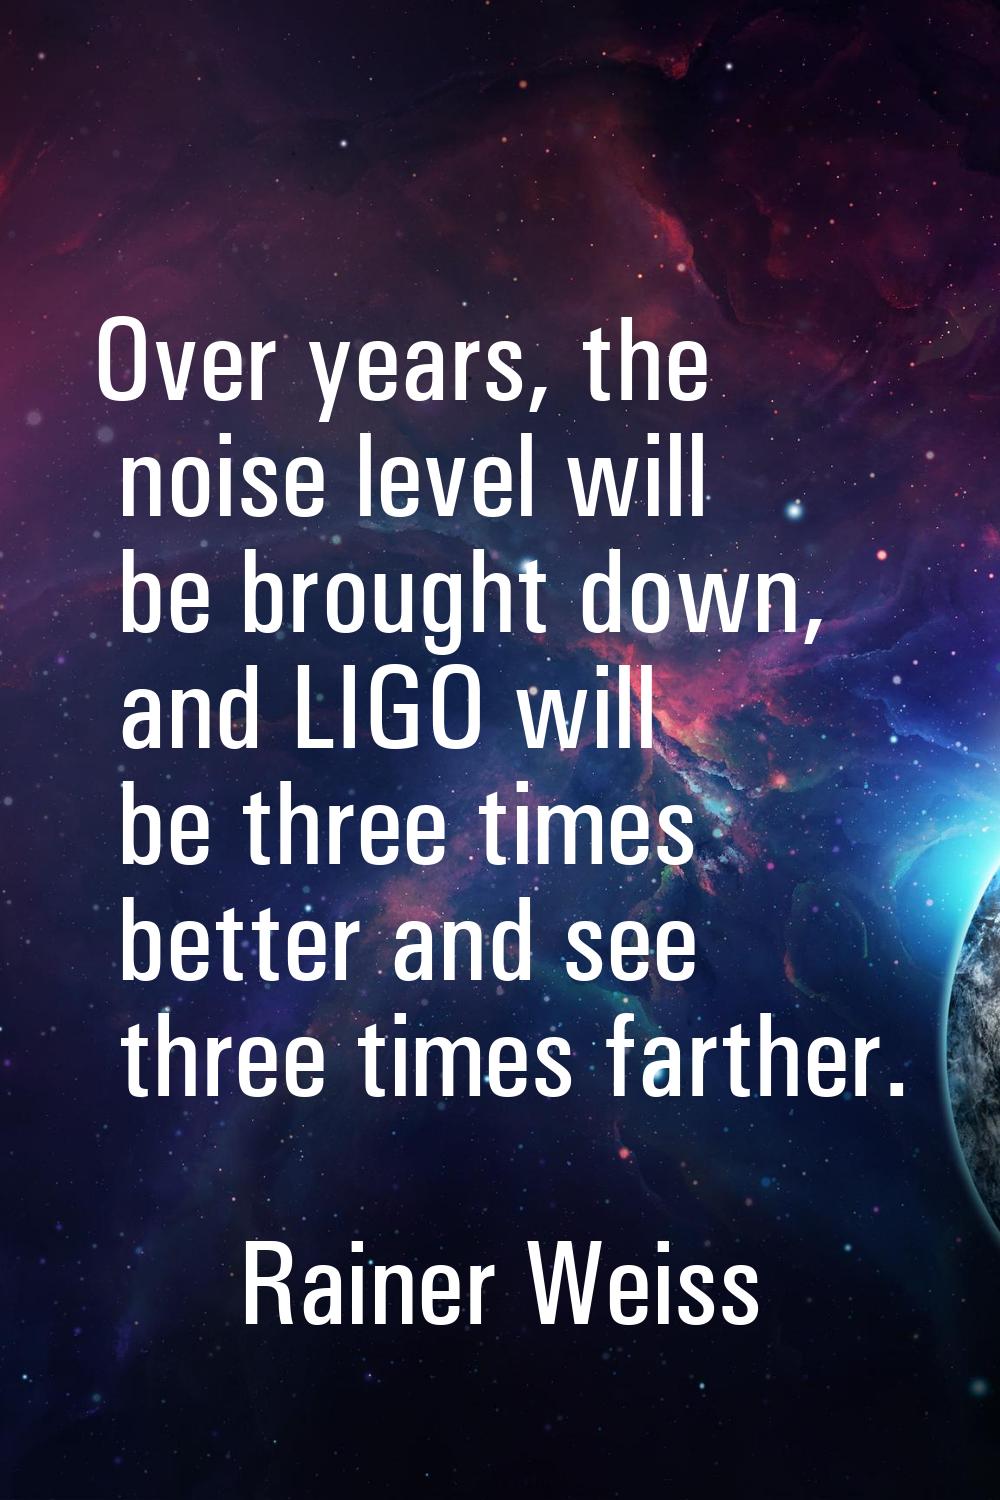 Over years, the noise level will be brought down, and LIGO will be three times better and see three